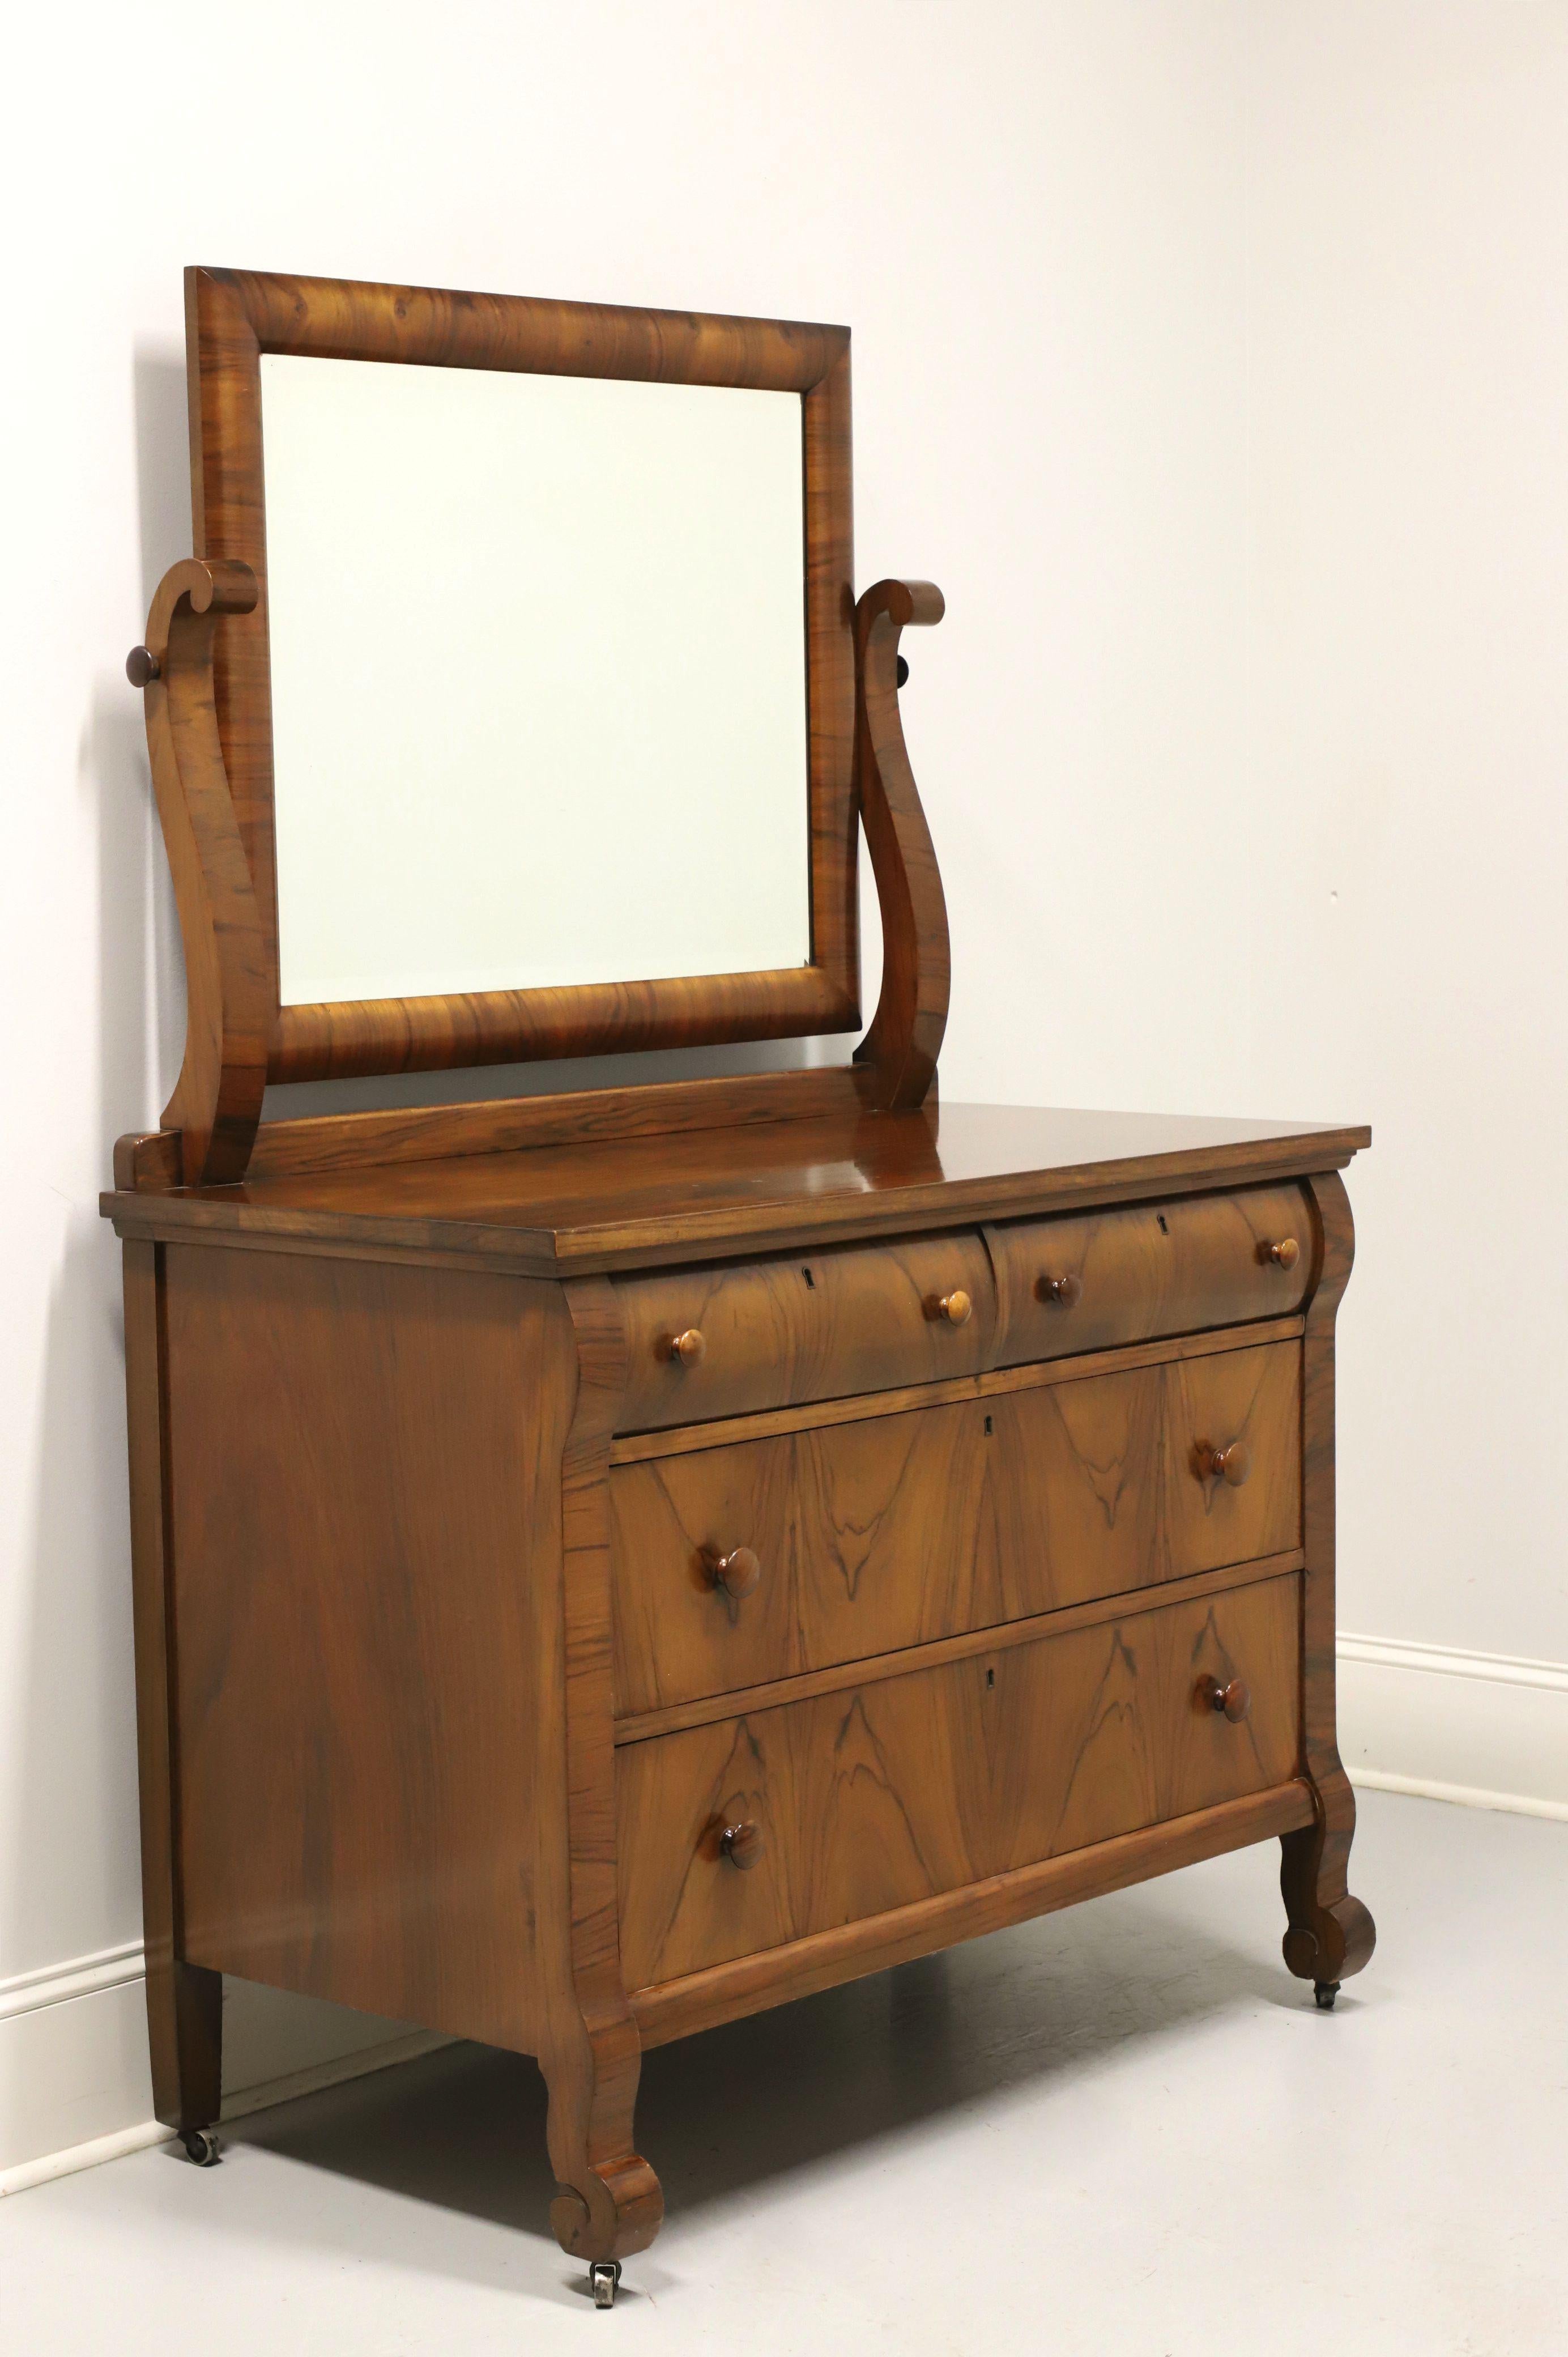 An antique Empire style dresser with attached mirror by Balkwill & Patch Furniture Co. Rosewood with classic Empire styling, upper gallery with curved outward mirror support arms, rectangular rosewood framed mirror, slightly curved outward sides,